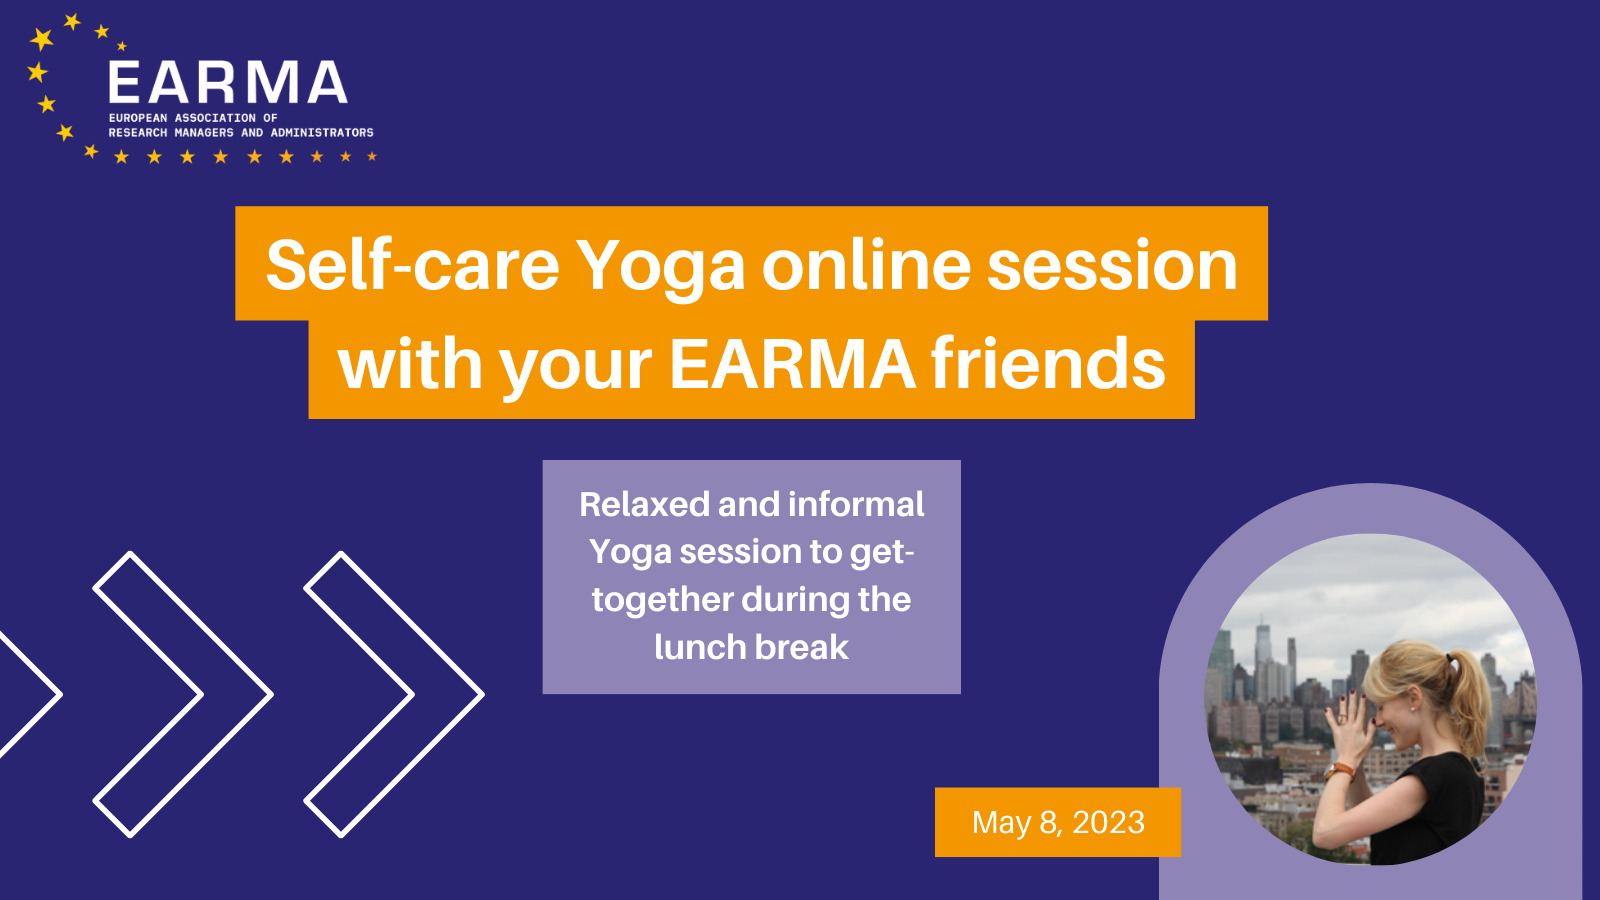 Self-care Yoga online session with your EARMA friends